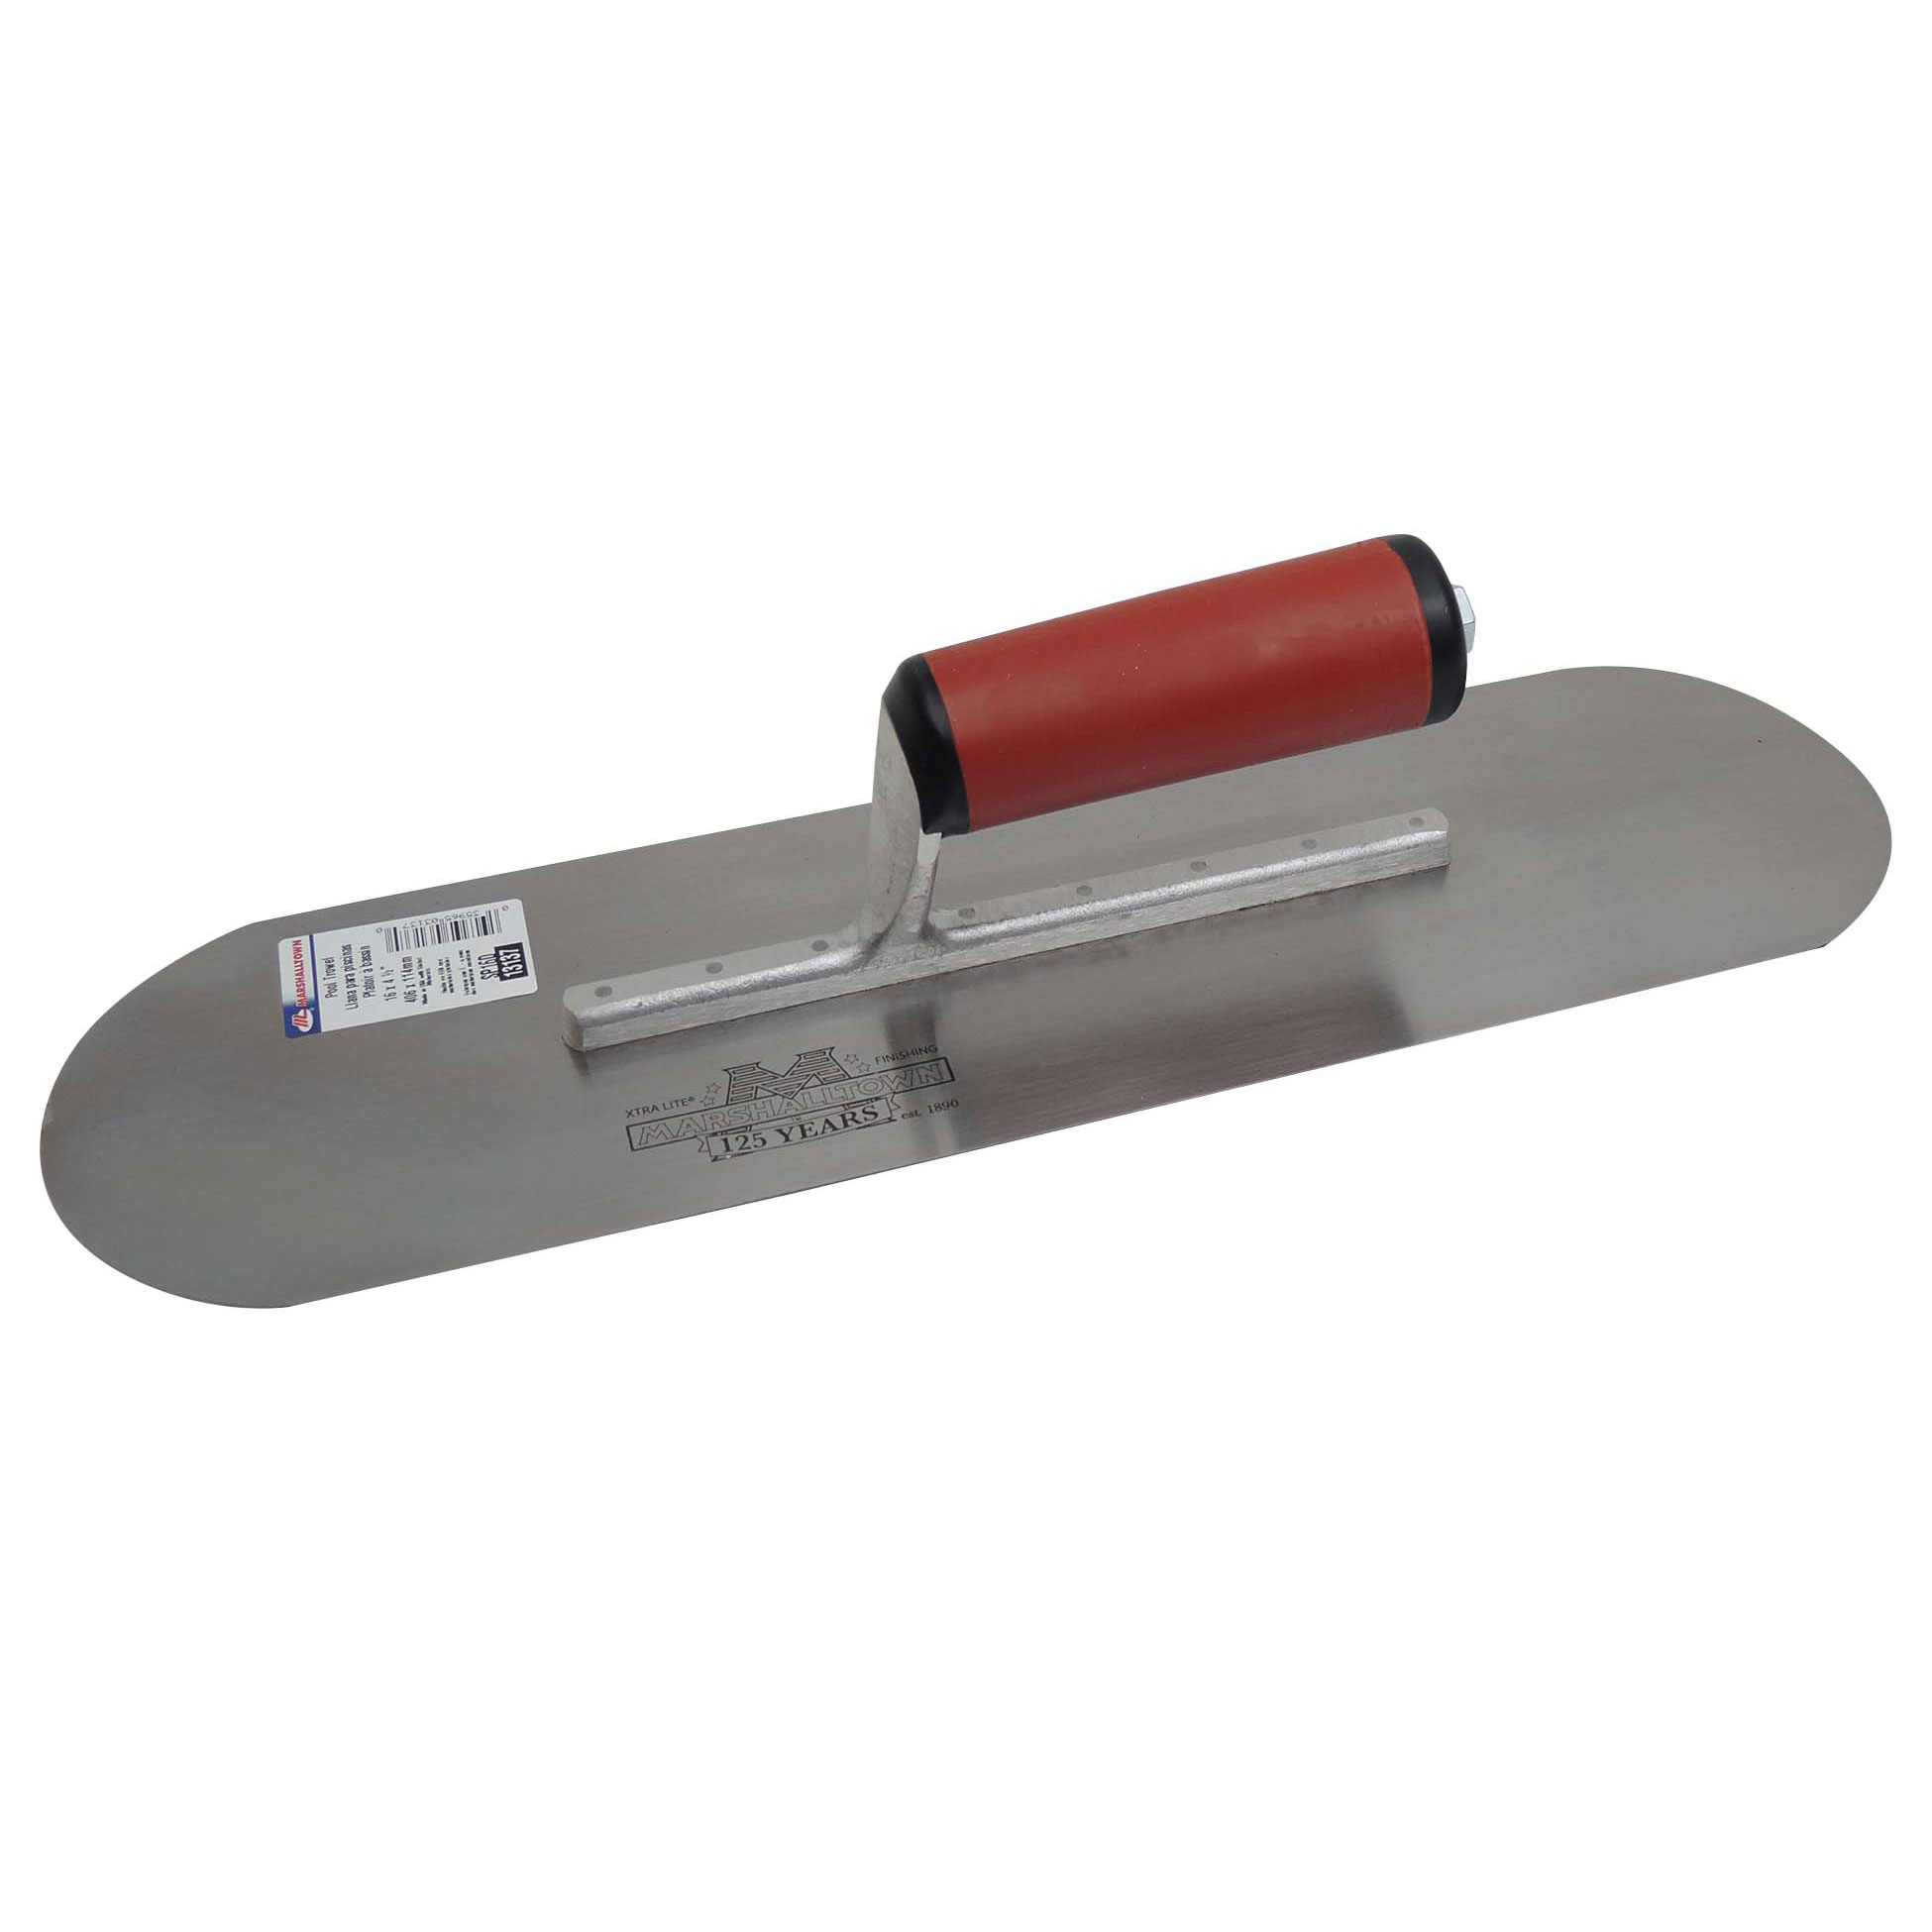 Marshalltown SP16D 16in x 4-1/2in Pool Trowel with Straight DuraSoft Handle SP16D